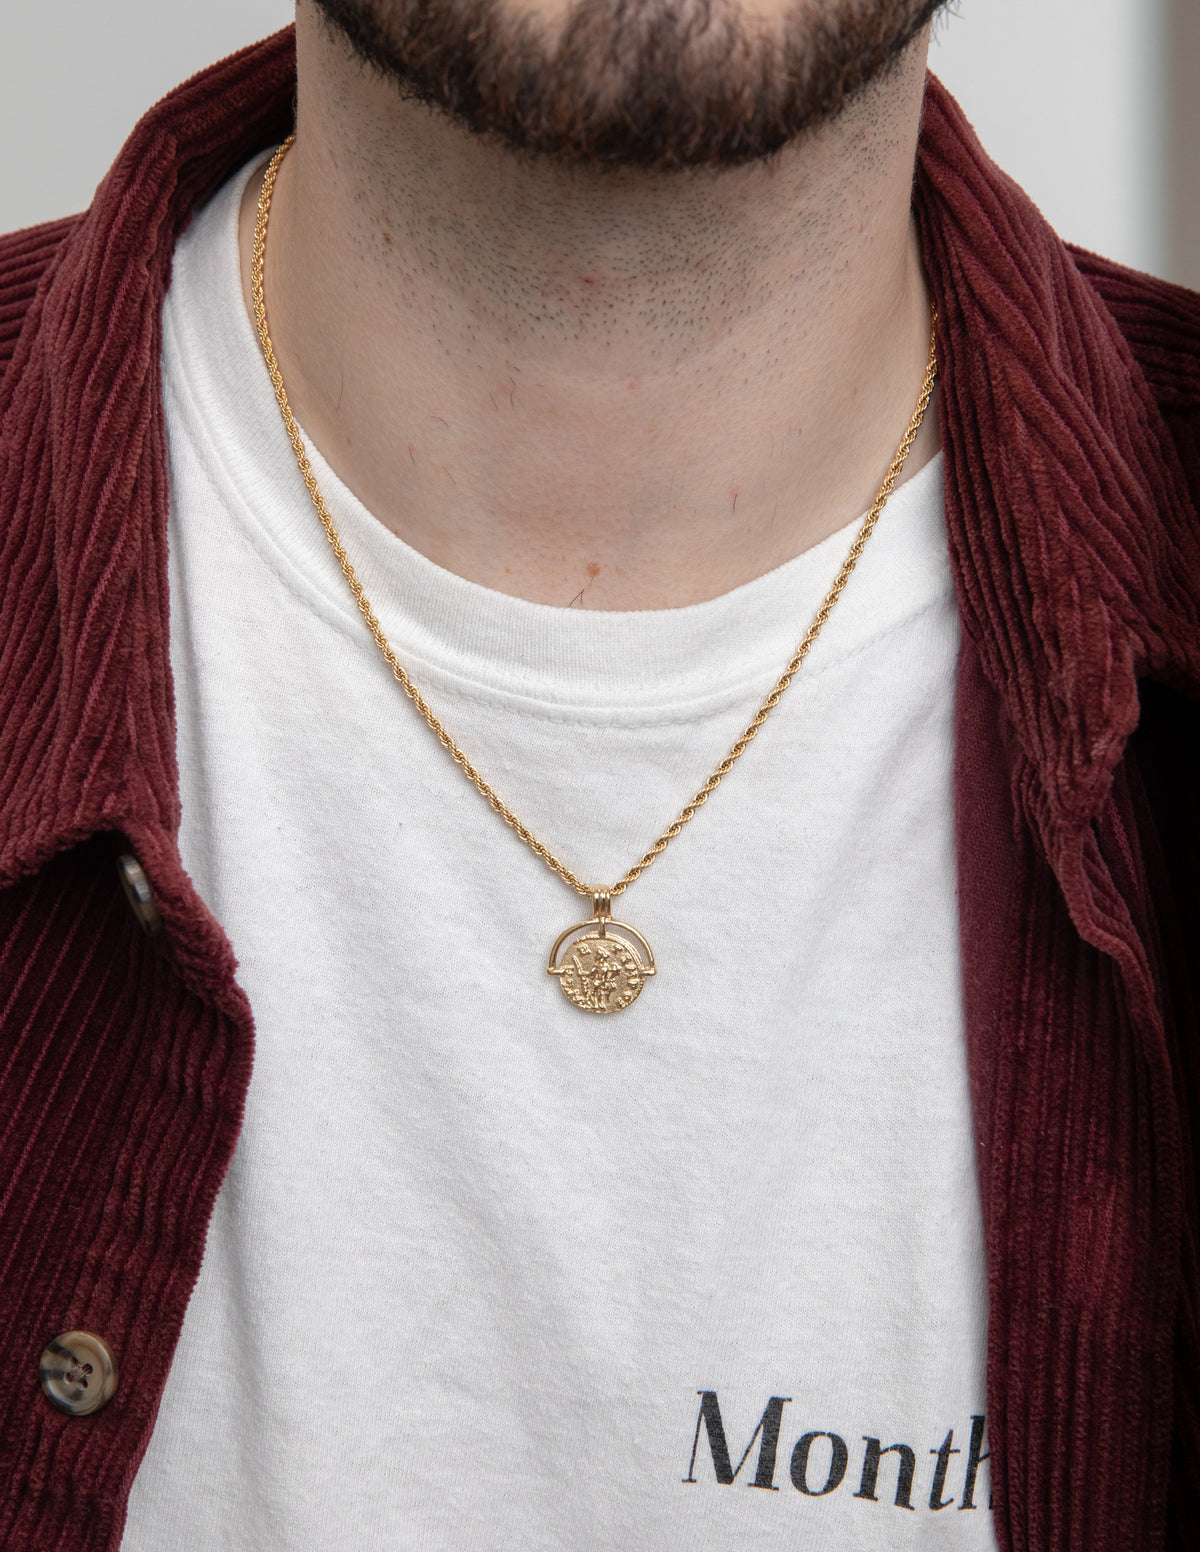 THE CLASSIC GOLD NECKLACE.